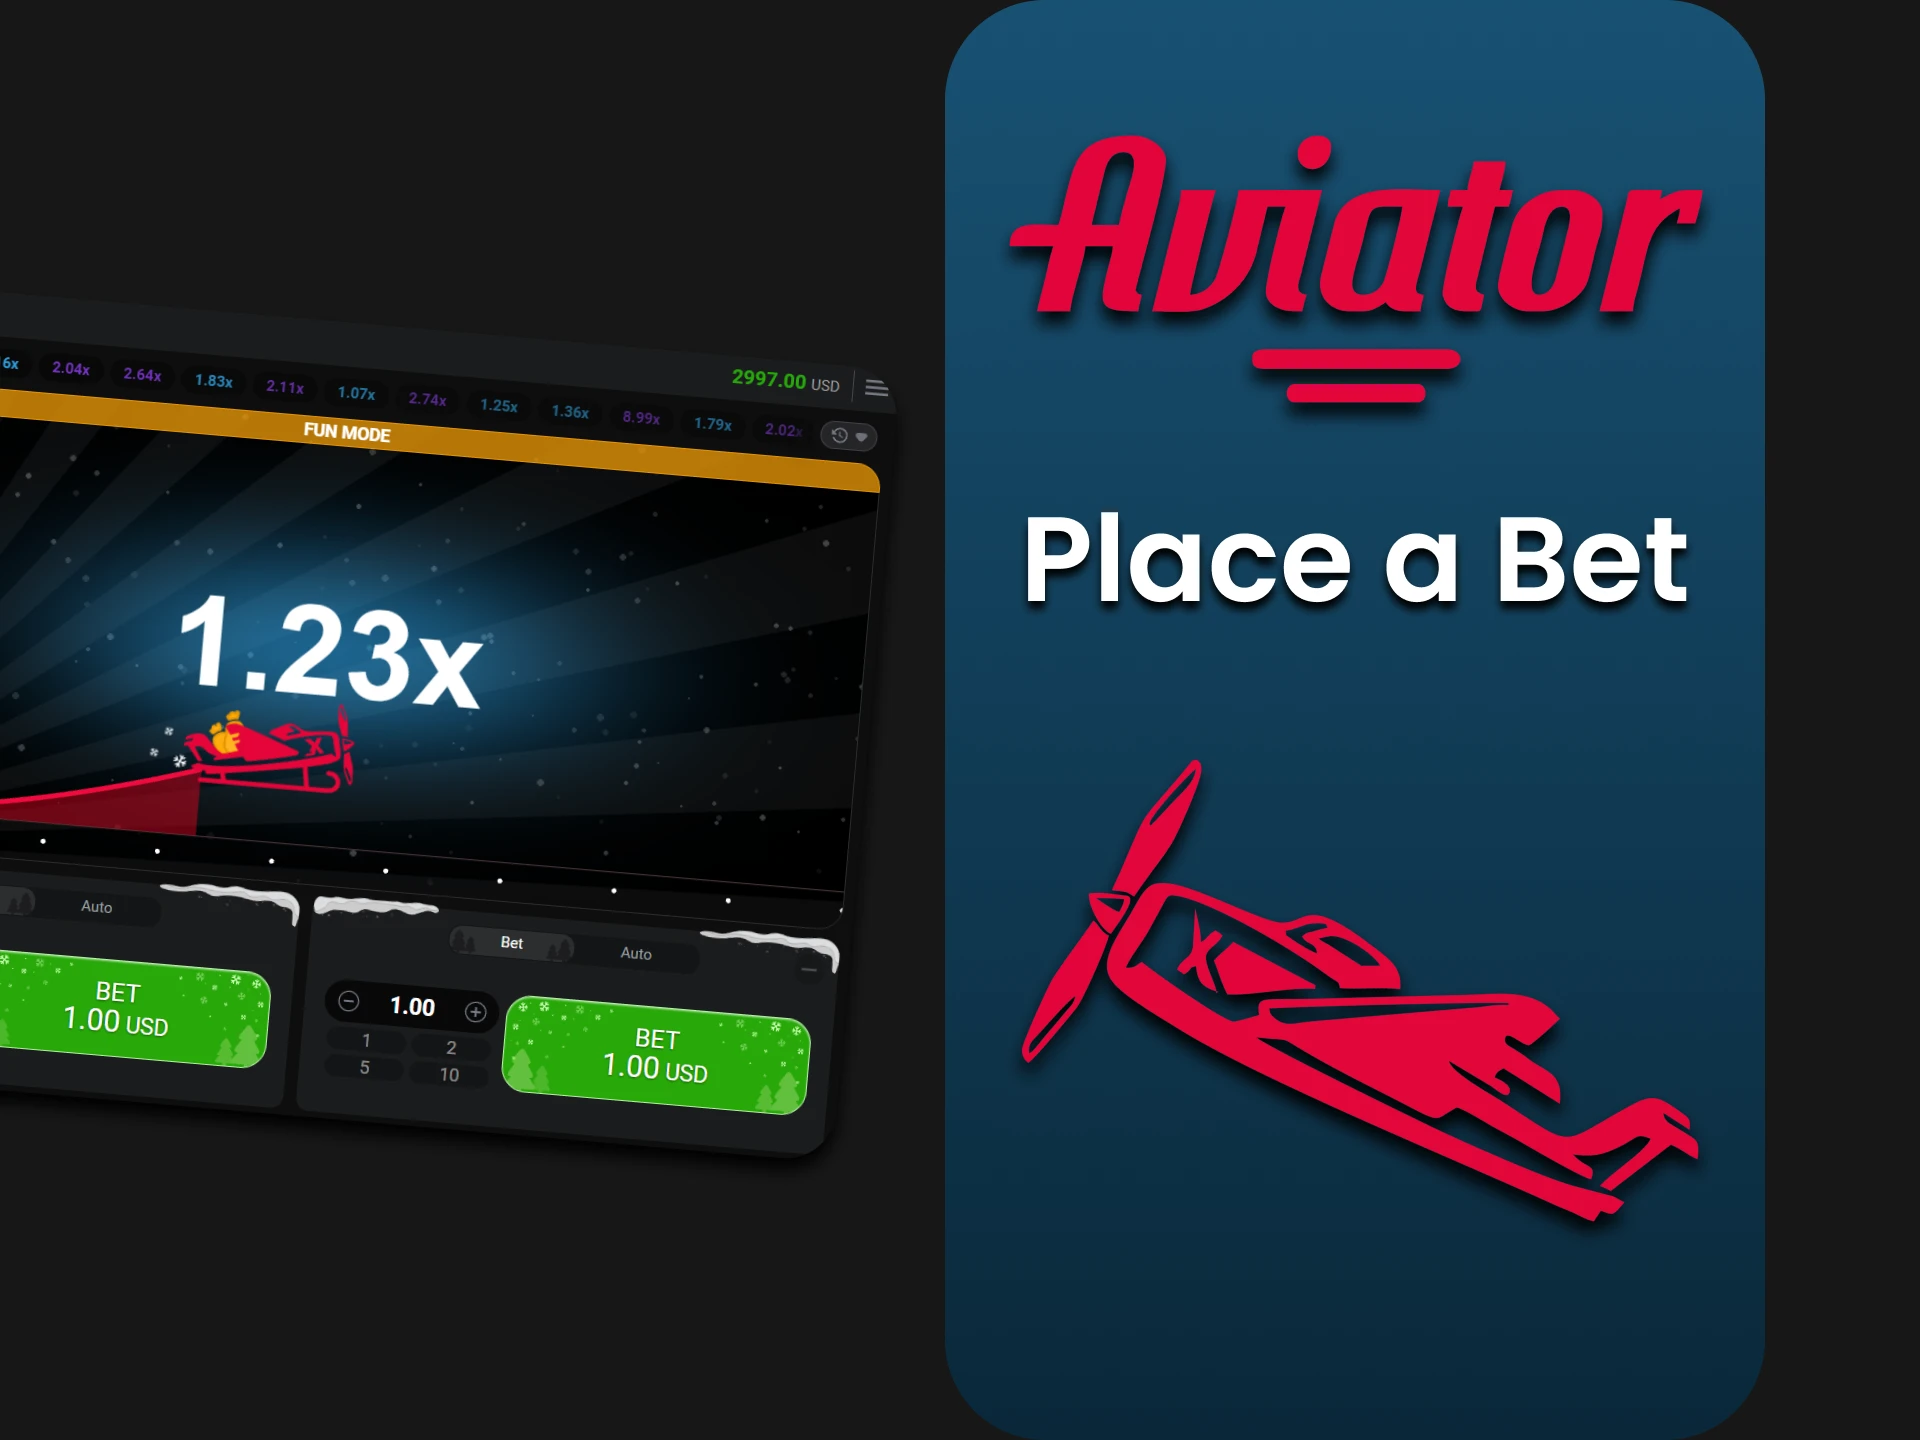 Find out how to place bets in the demo version of the Aviator game.